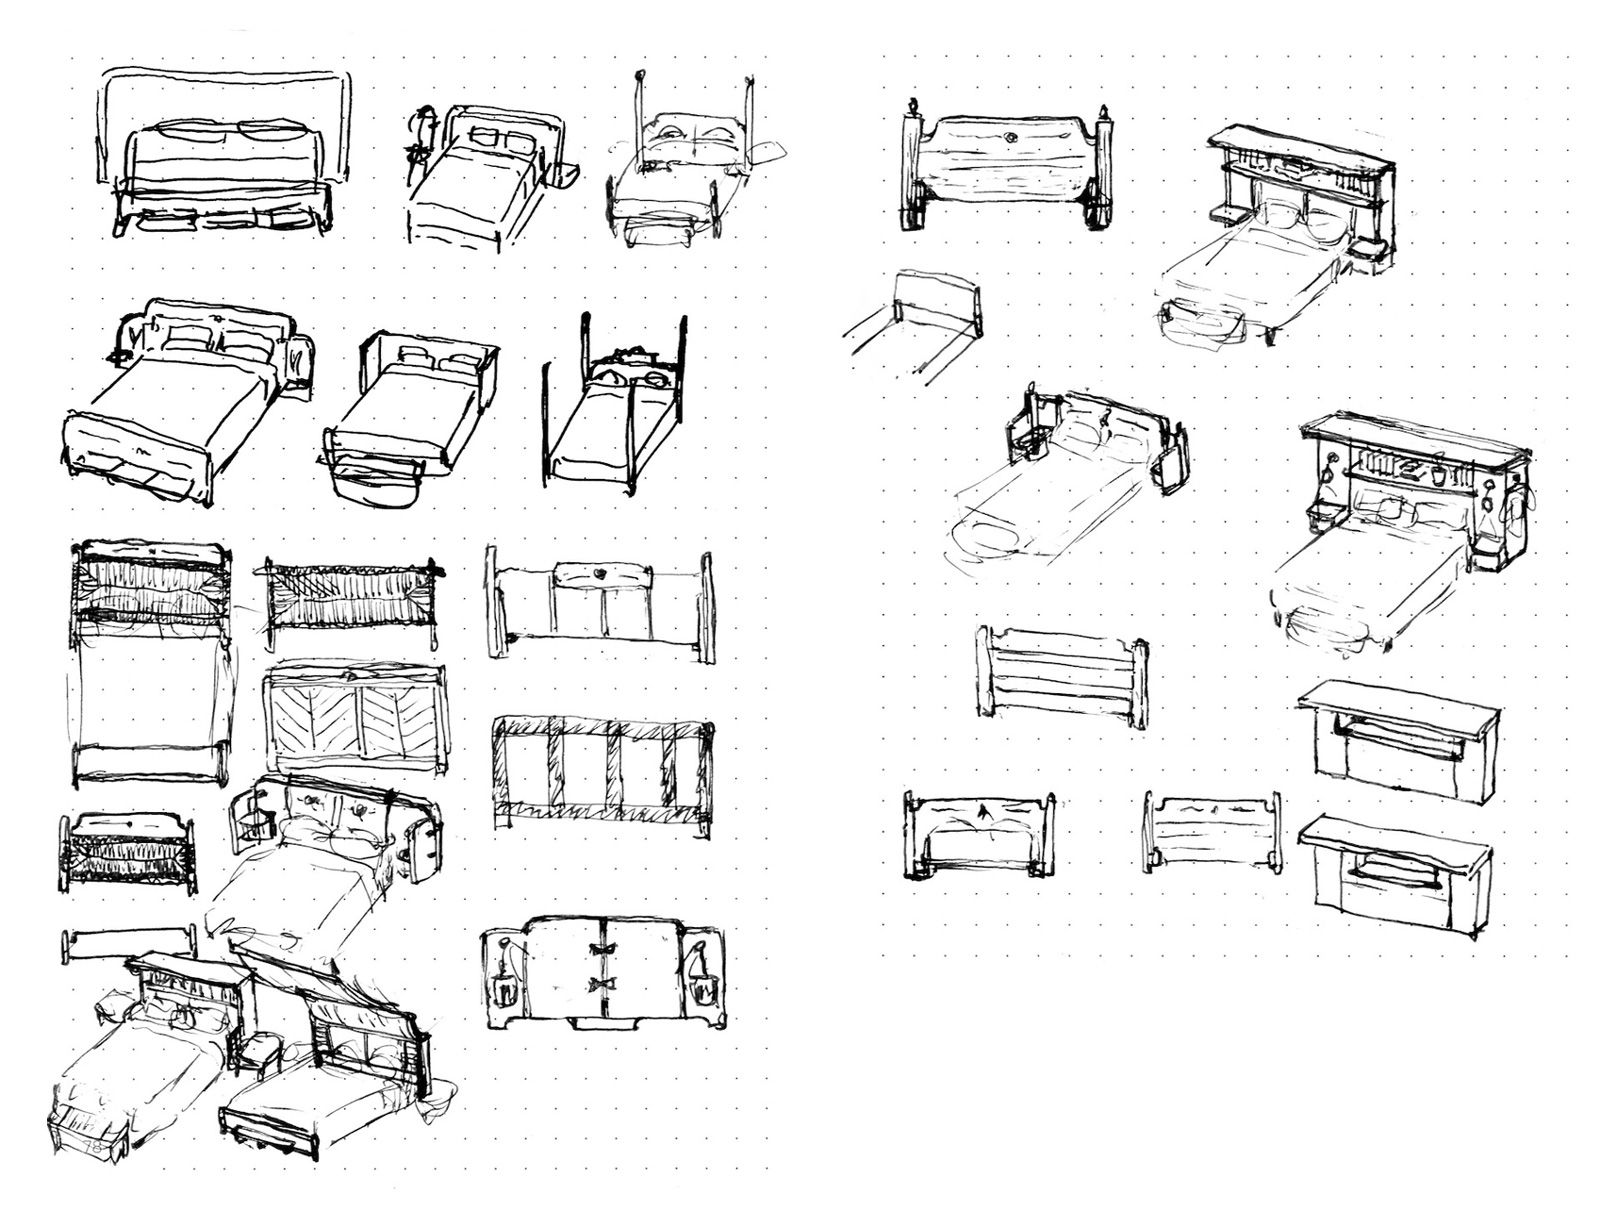 Multiple sketches of headboard designs, some with canopies or “arms” wrapping around the head of the bed.